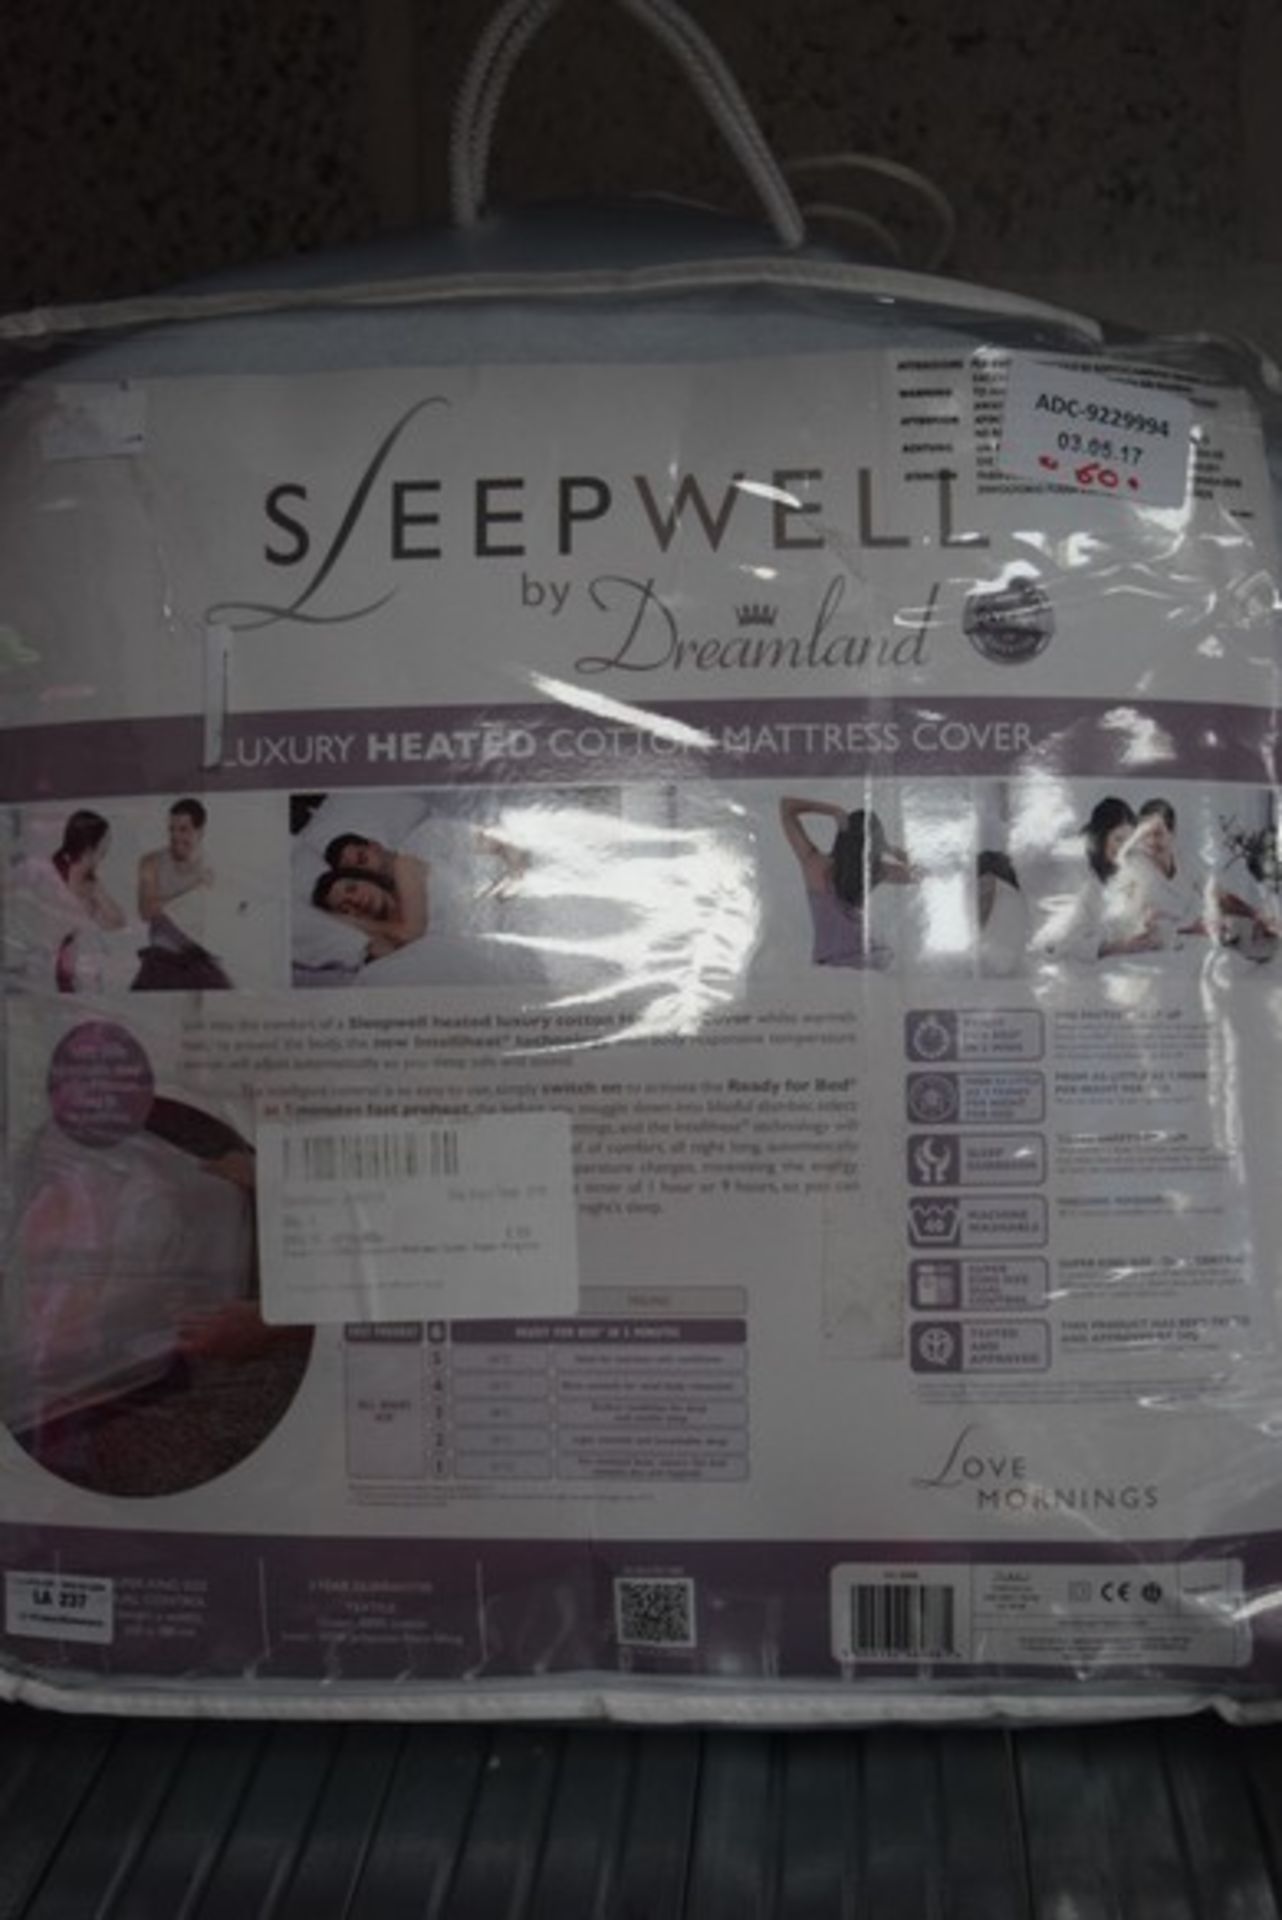 1 x SLEEPWELL LUXURY HEATED COTTON SUPER KING SIZE DUVET RRP £70 03.05.17 *PLEASE NOTE THAT THE